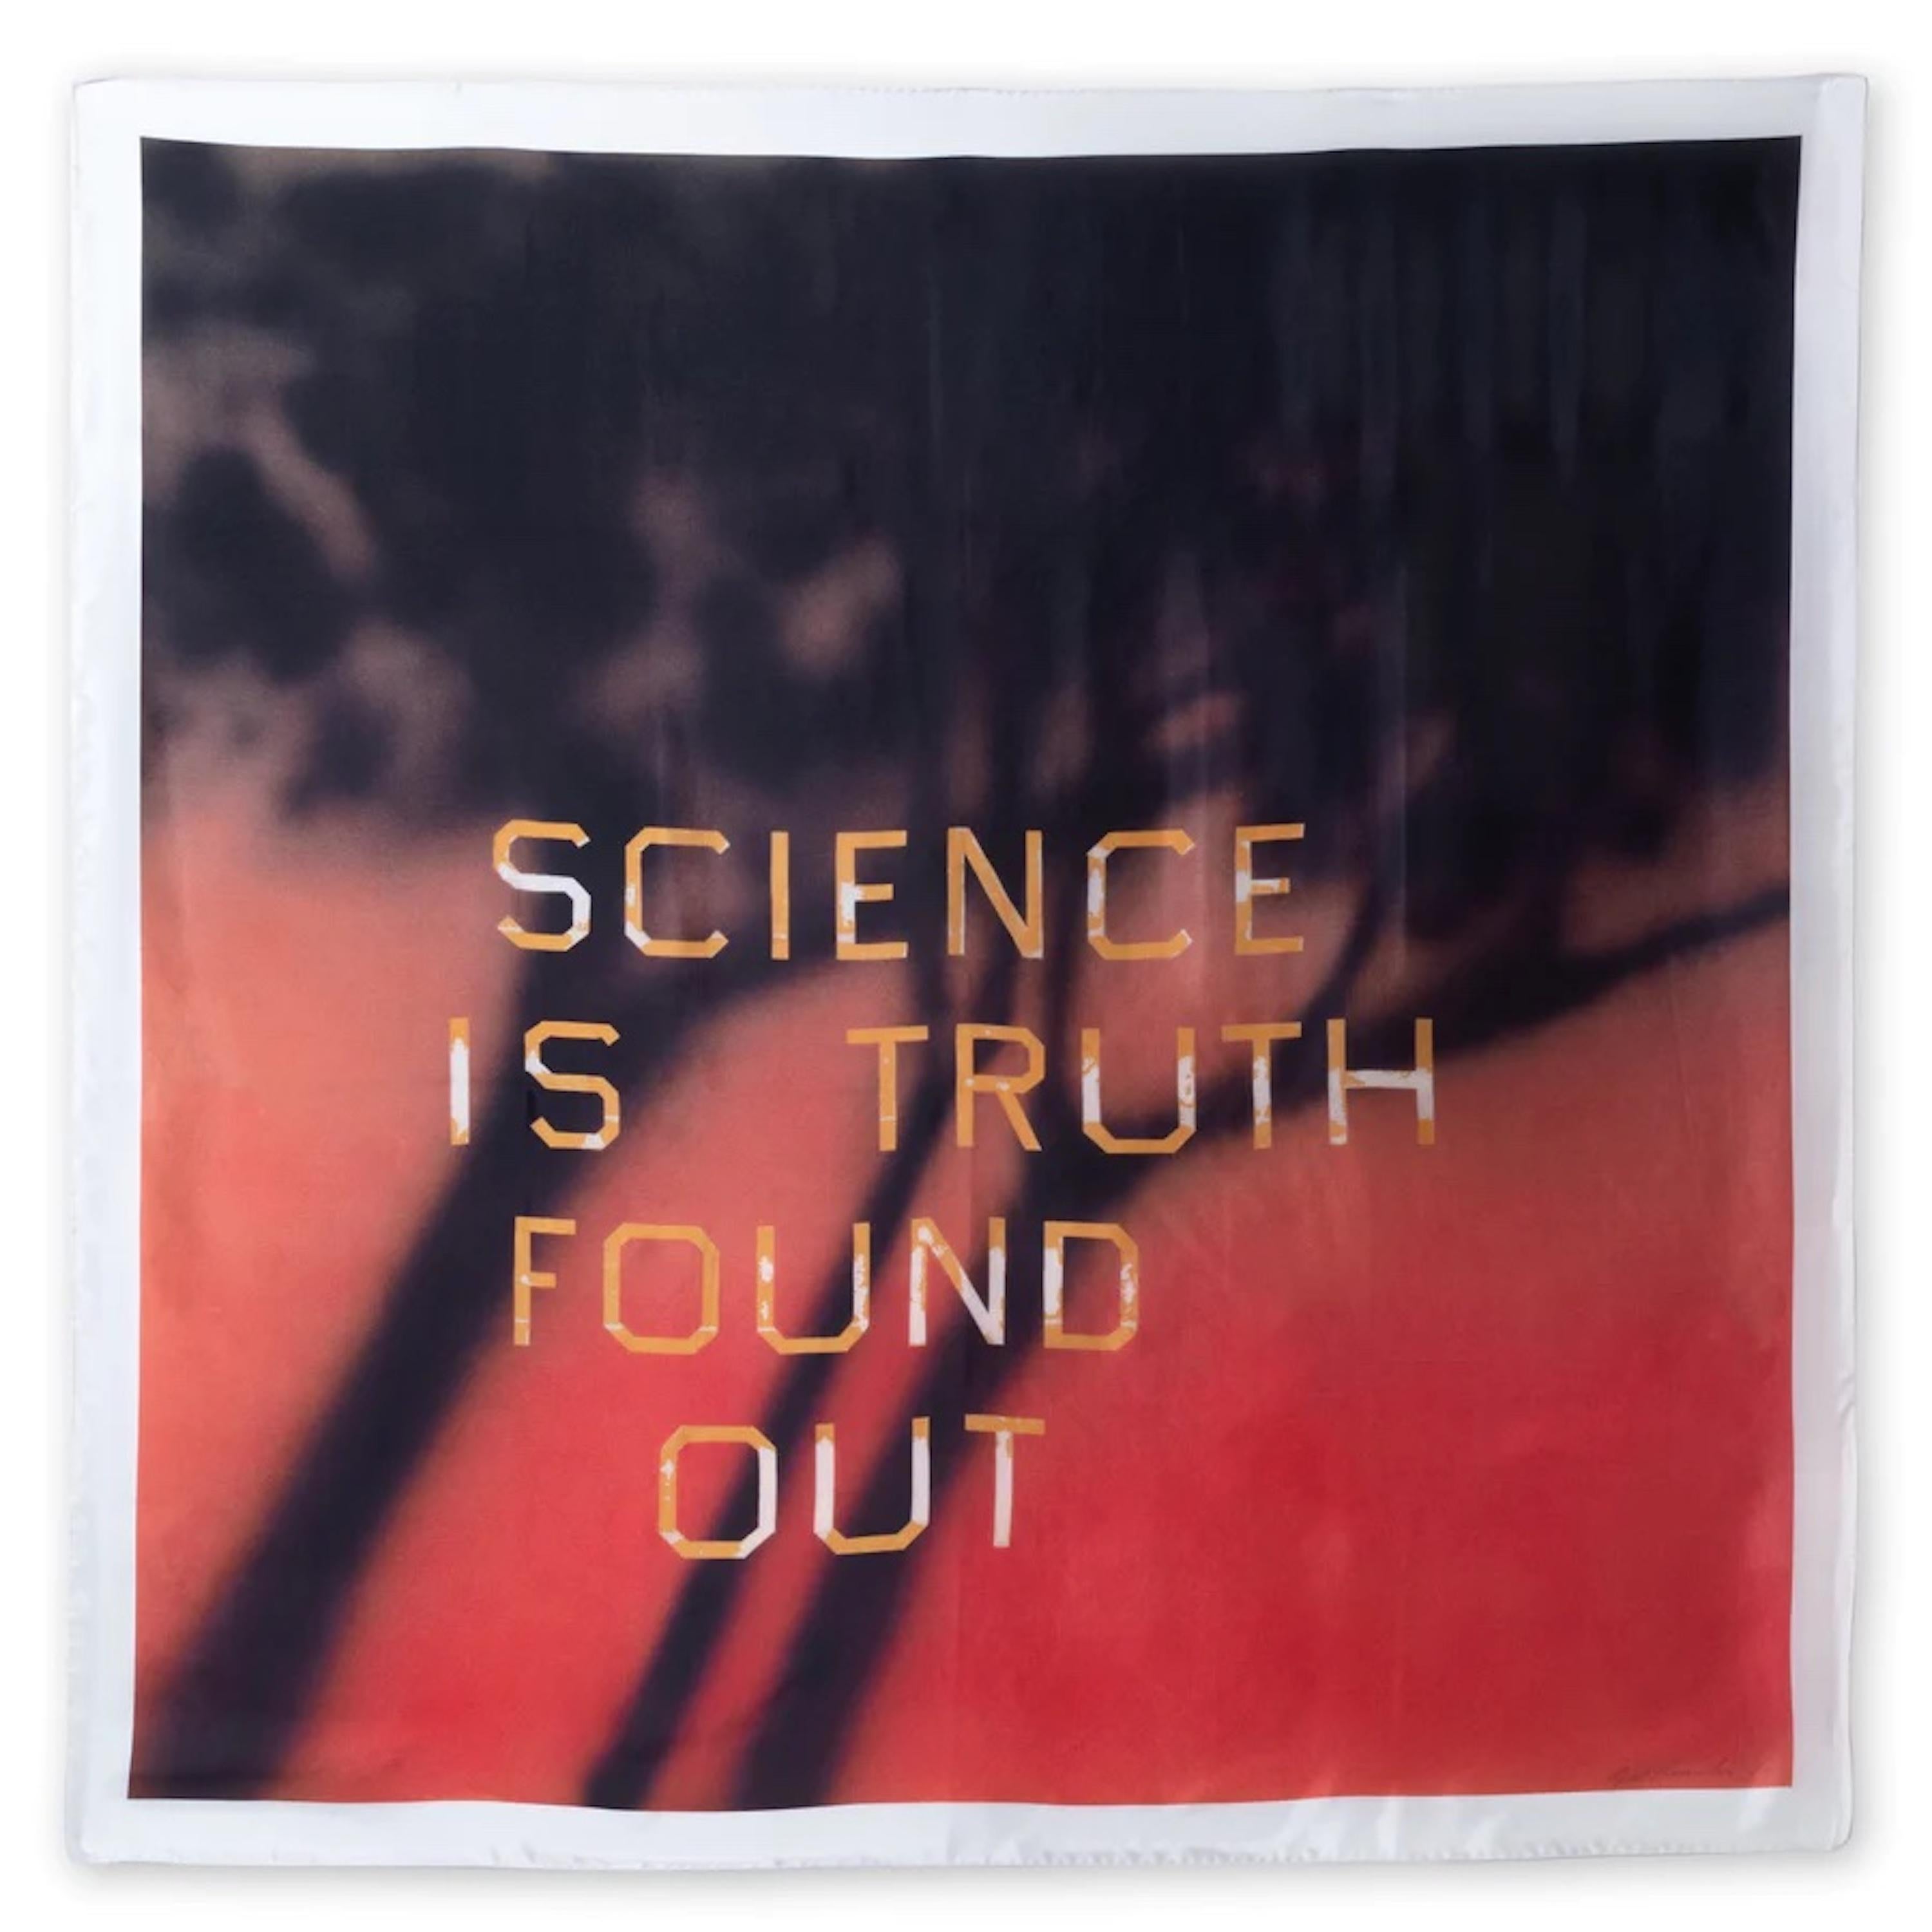 Science is Truth Found Out (Red),  Limited Edition signed scarf: 51.25 Sq inches